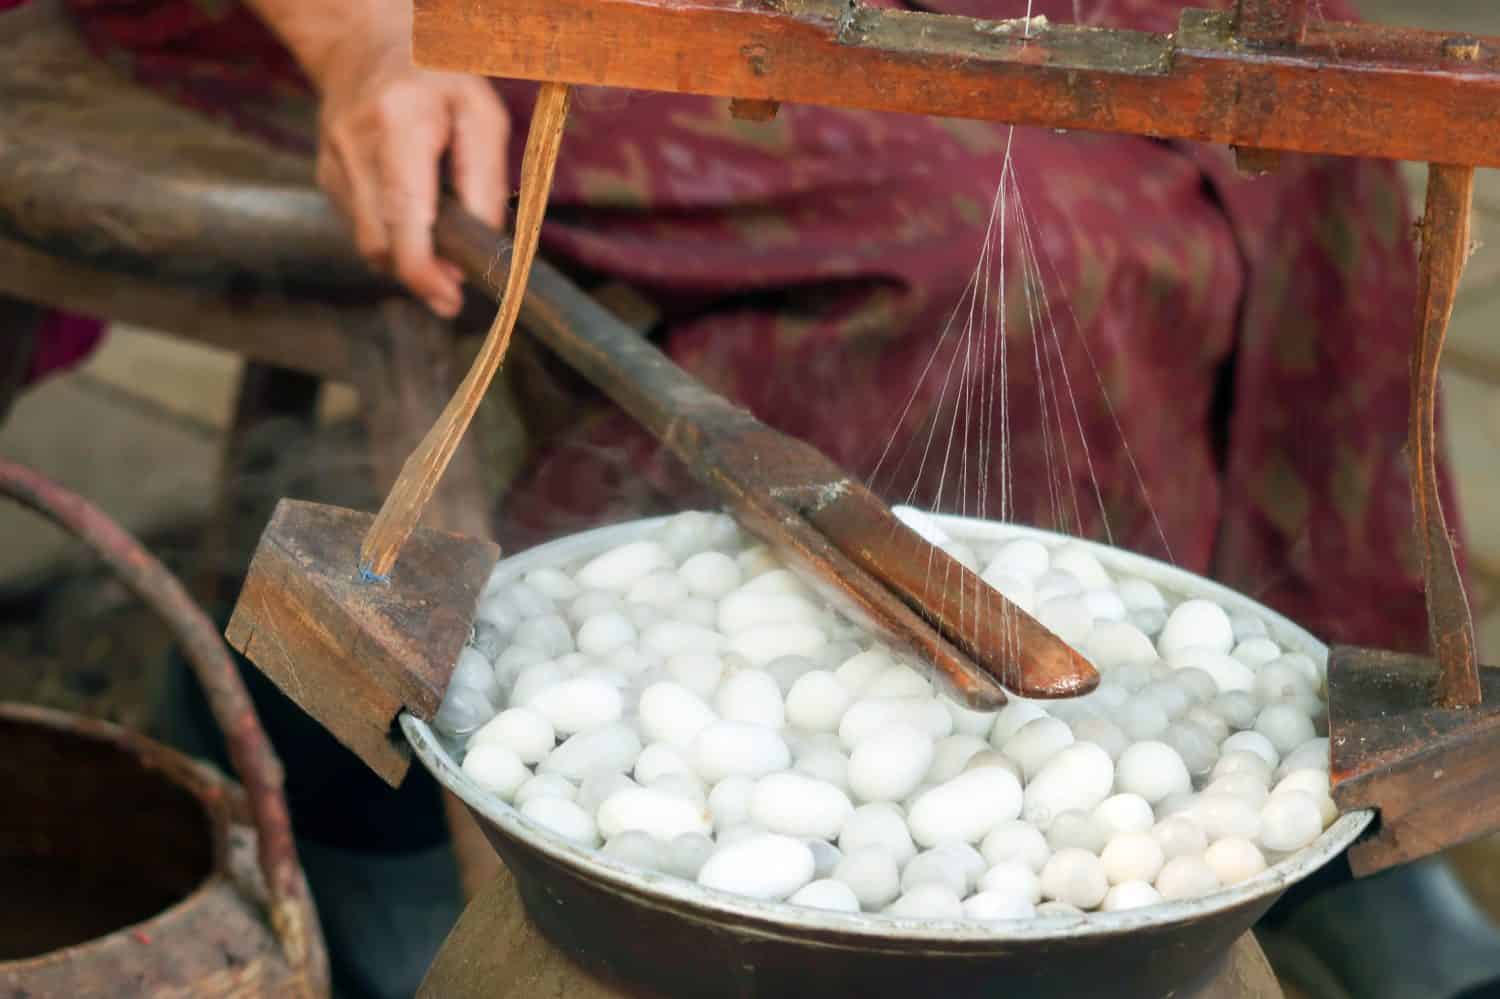 traditional silk production. The process of producing silk by hand from silkworm cocoons.